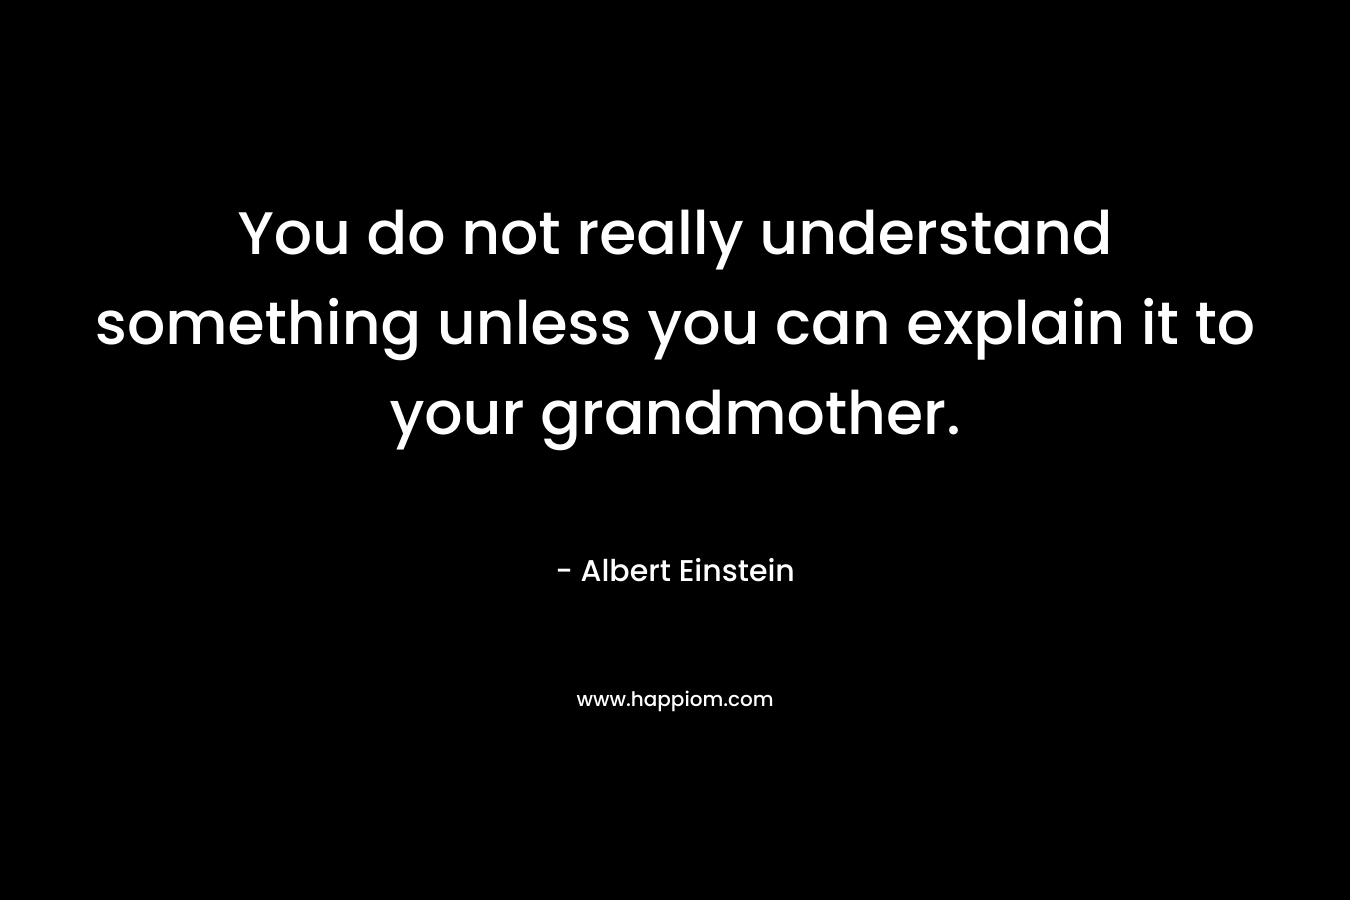 You do not really understand something unless you can explain it to your grandmother. – Albert Einstein